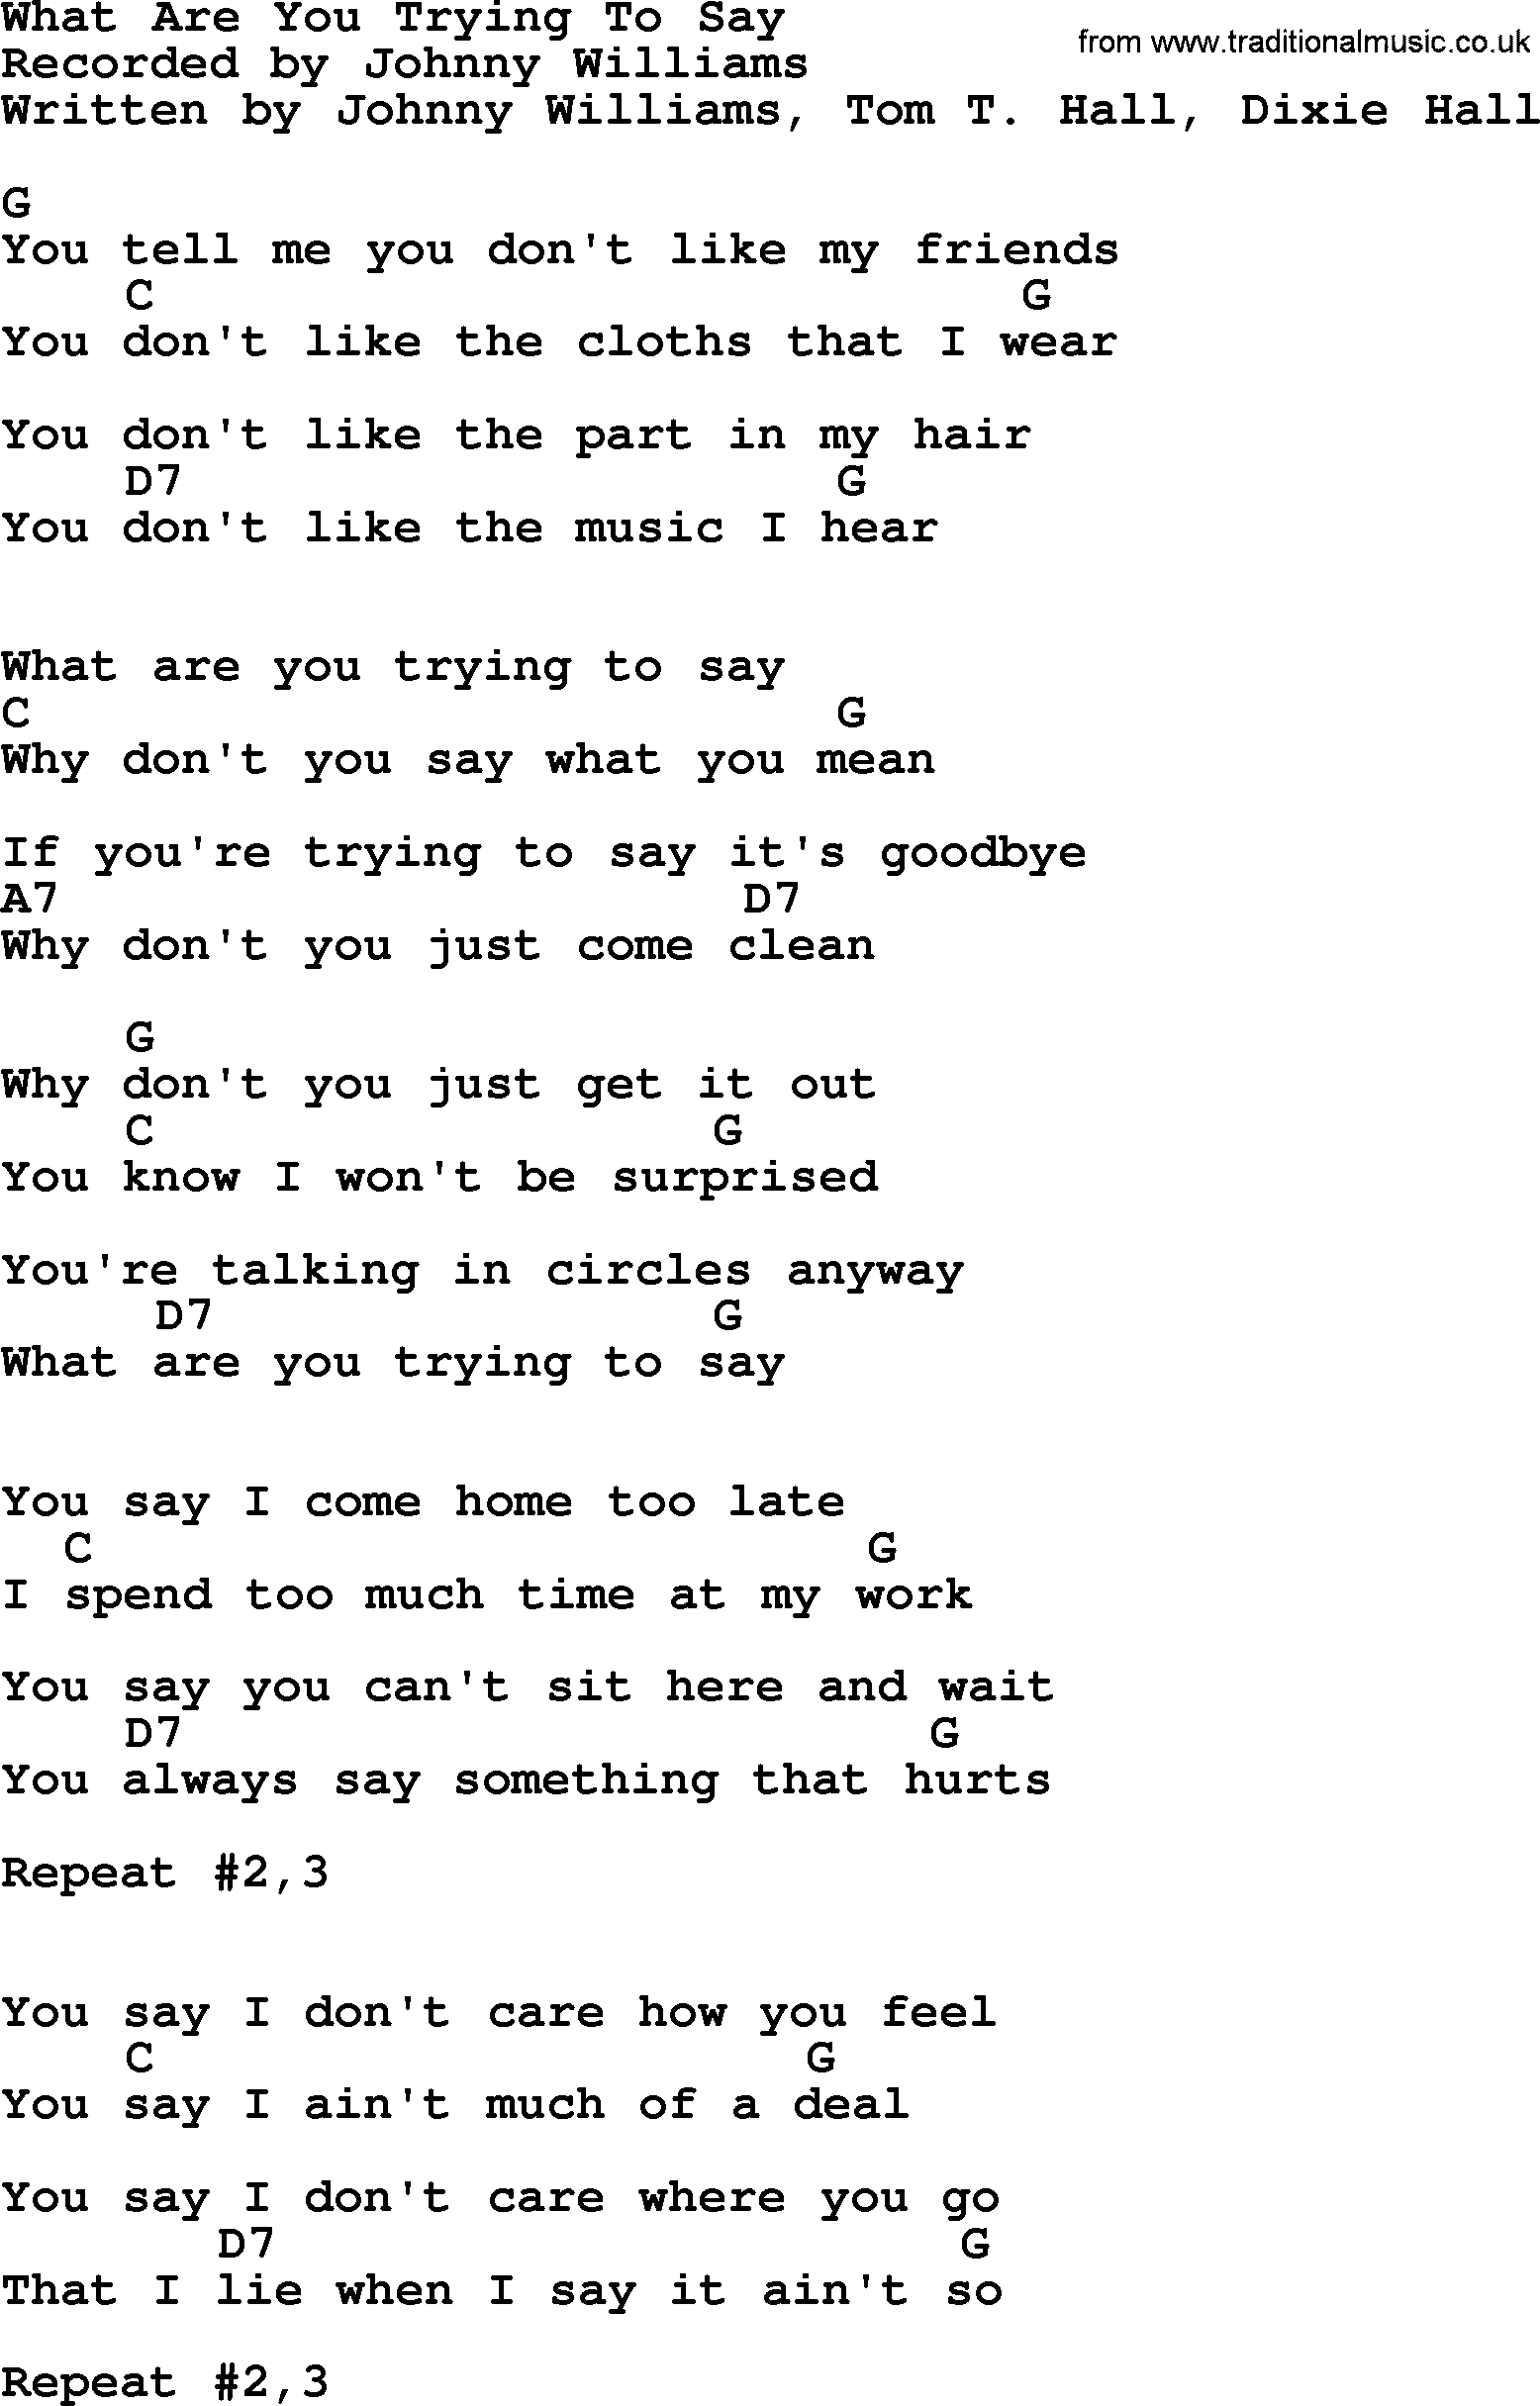 Bluegrass song: What Are You Trying To Say, lyrics and chords